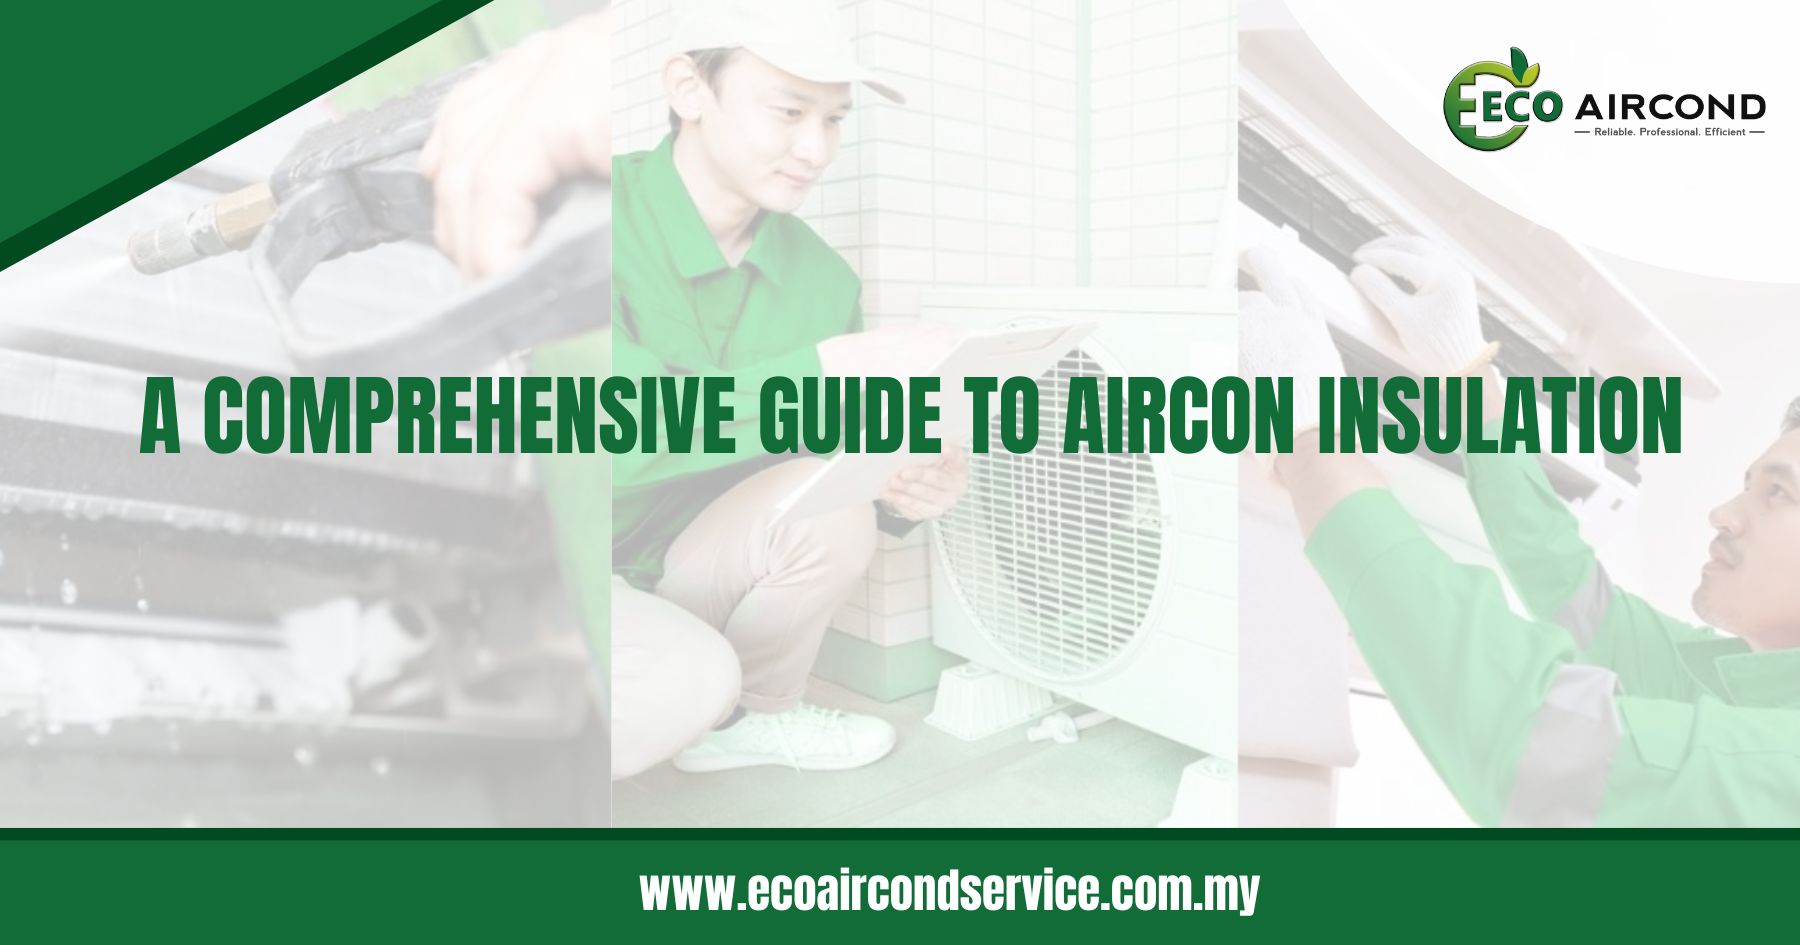 A Comprehensive Guide to Aircon Insulation